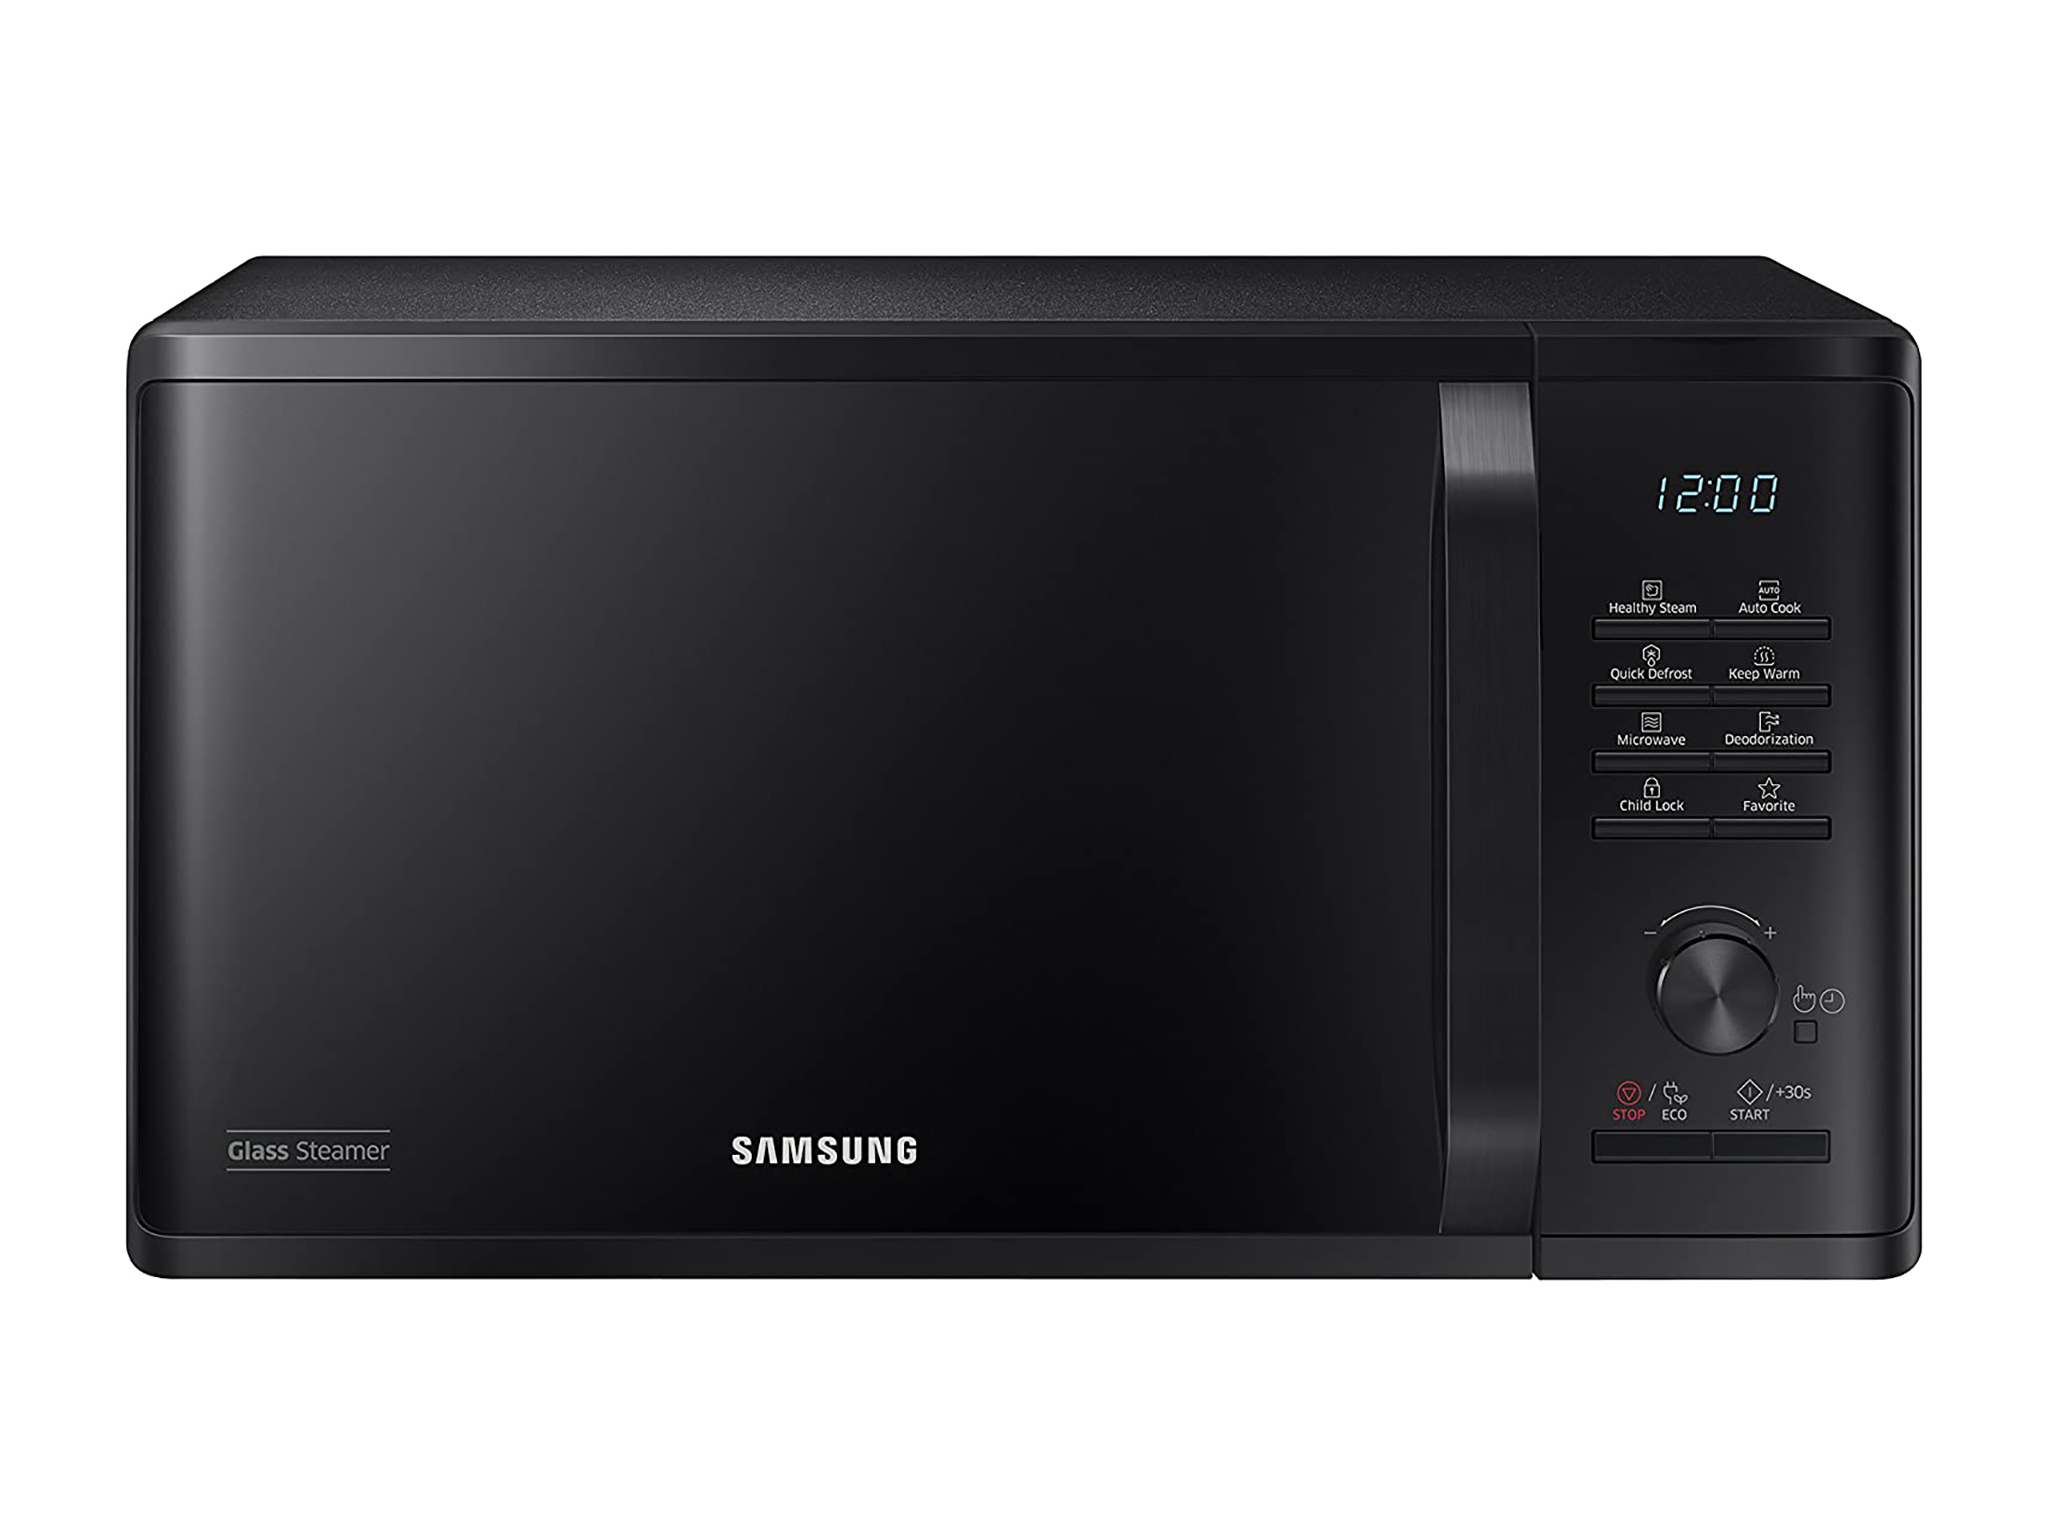 Samsung solo microwave oven with health steam